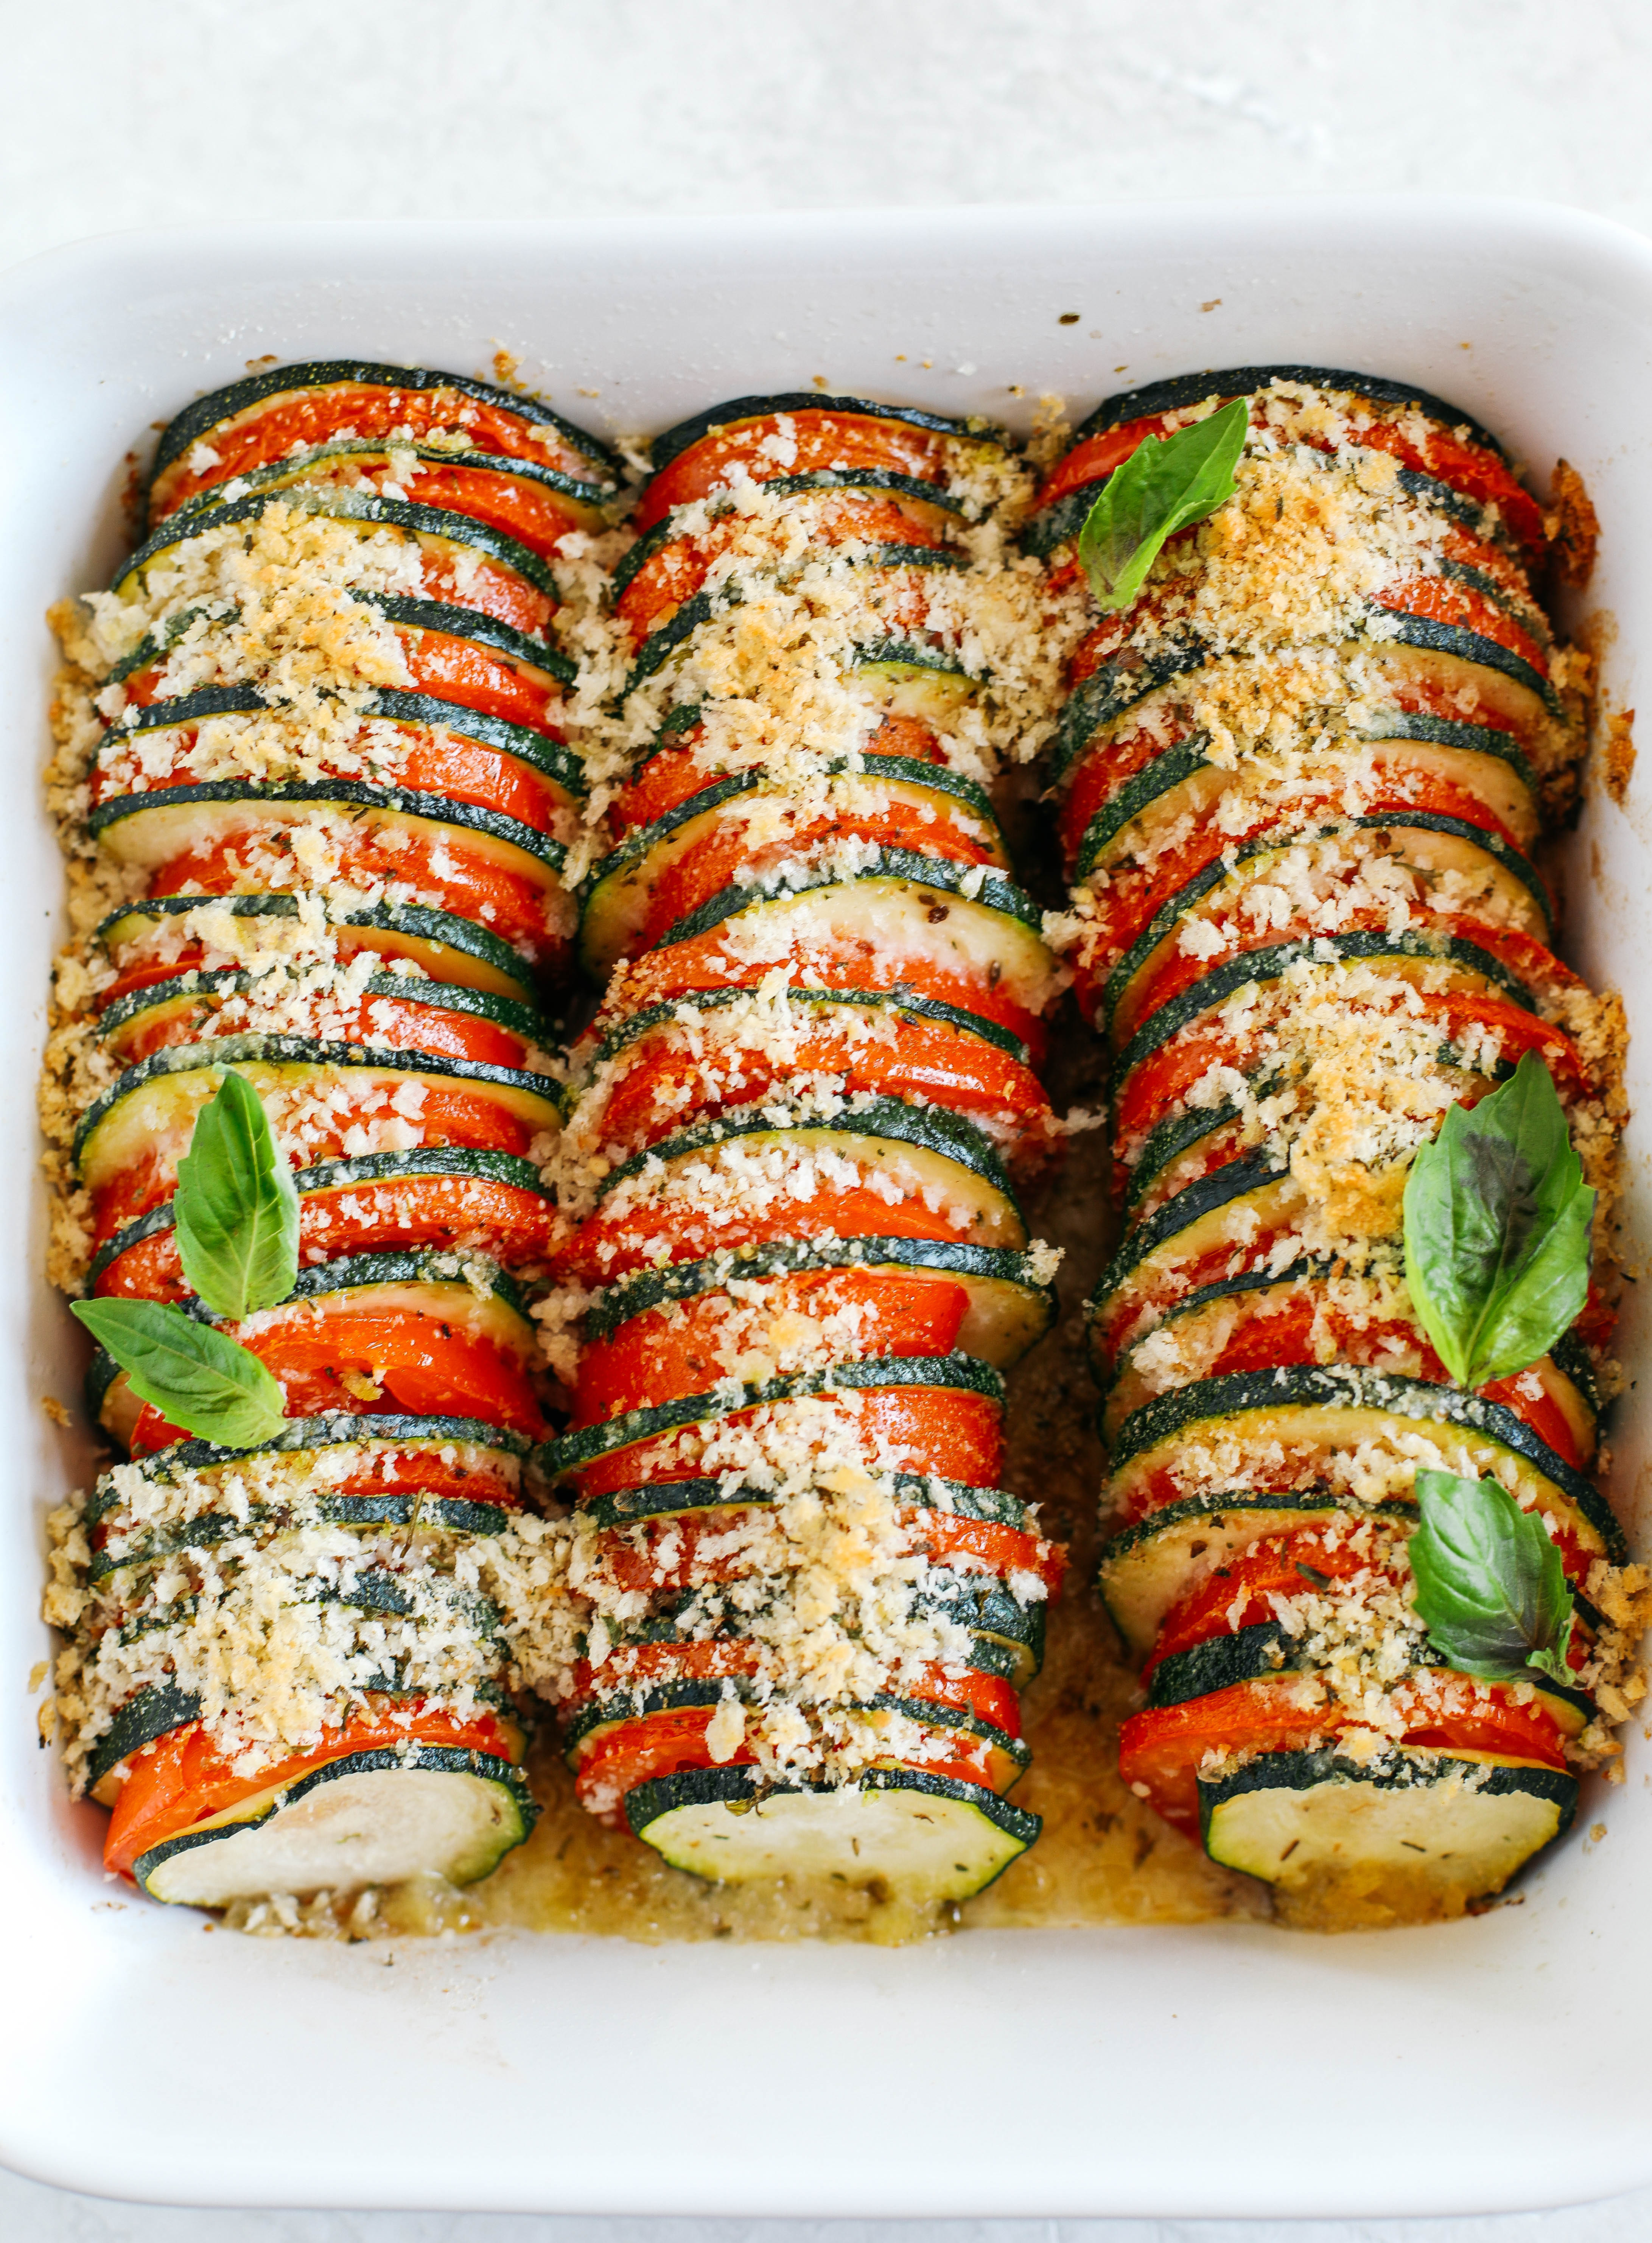 This Summer Zucchini and Tomato Gratin is filled with layers of delicious veggies all topped with a cheesy, crunchy herb topping that is baked to perfection!  